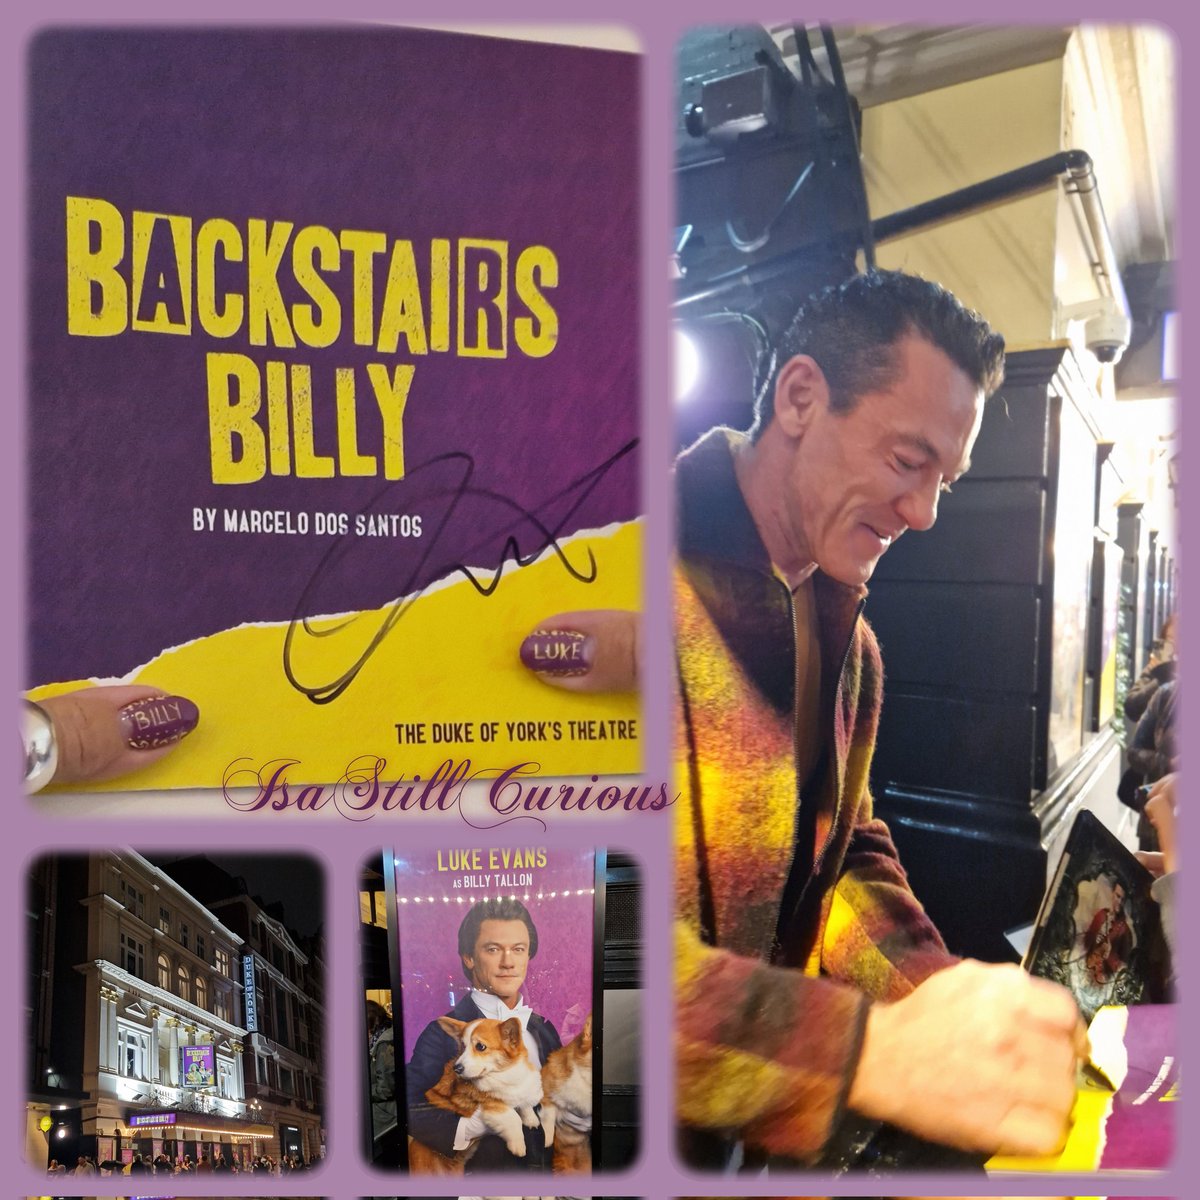 Back home in #Berlin and already missing #BackstairsBilly and #London
What a great evening @monitroll65 , @glasspider64 and I had on Saturday at the #DukeOfYorksTheatre 🤩 @TheRealLukevans and #PenelopeWilton were a delight to see on stage. @MsEmilyBarber was very cute.